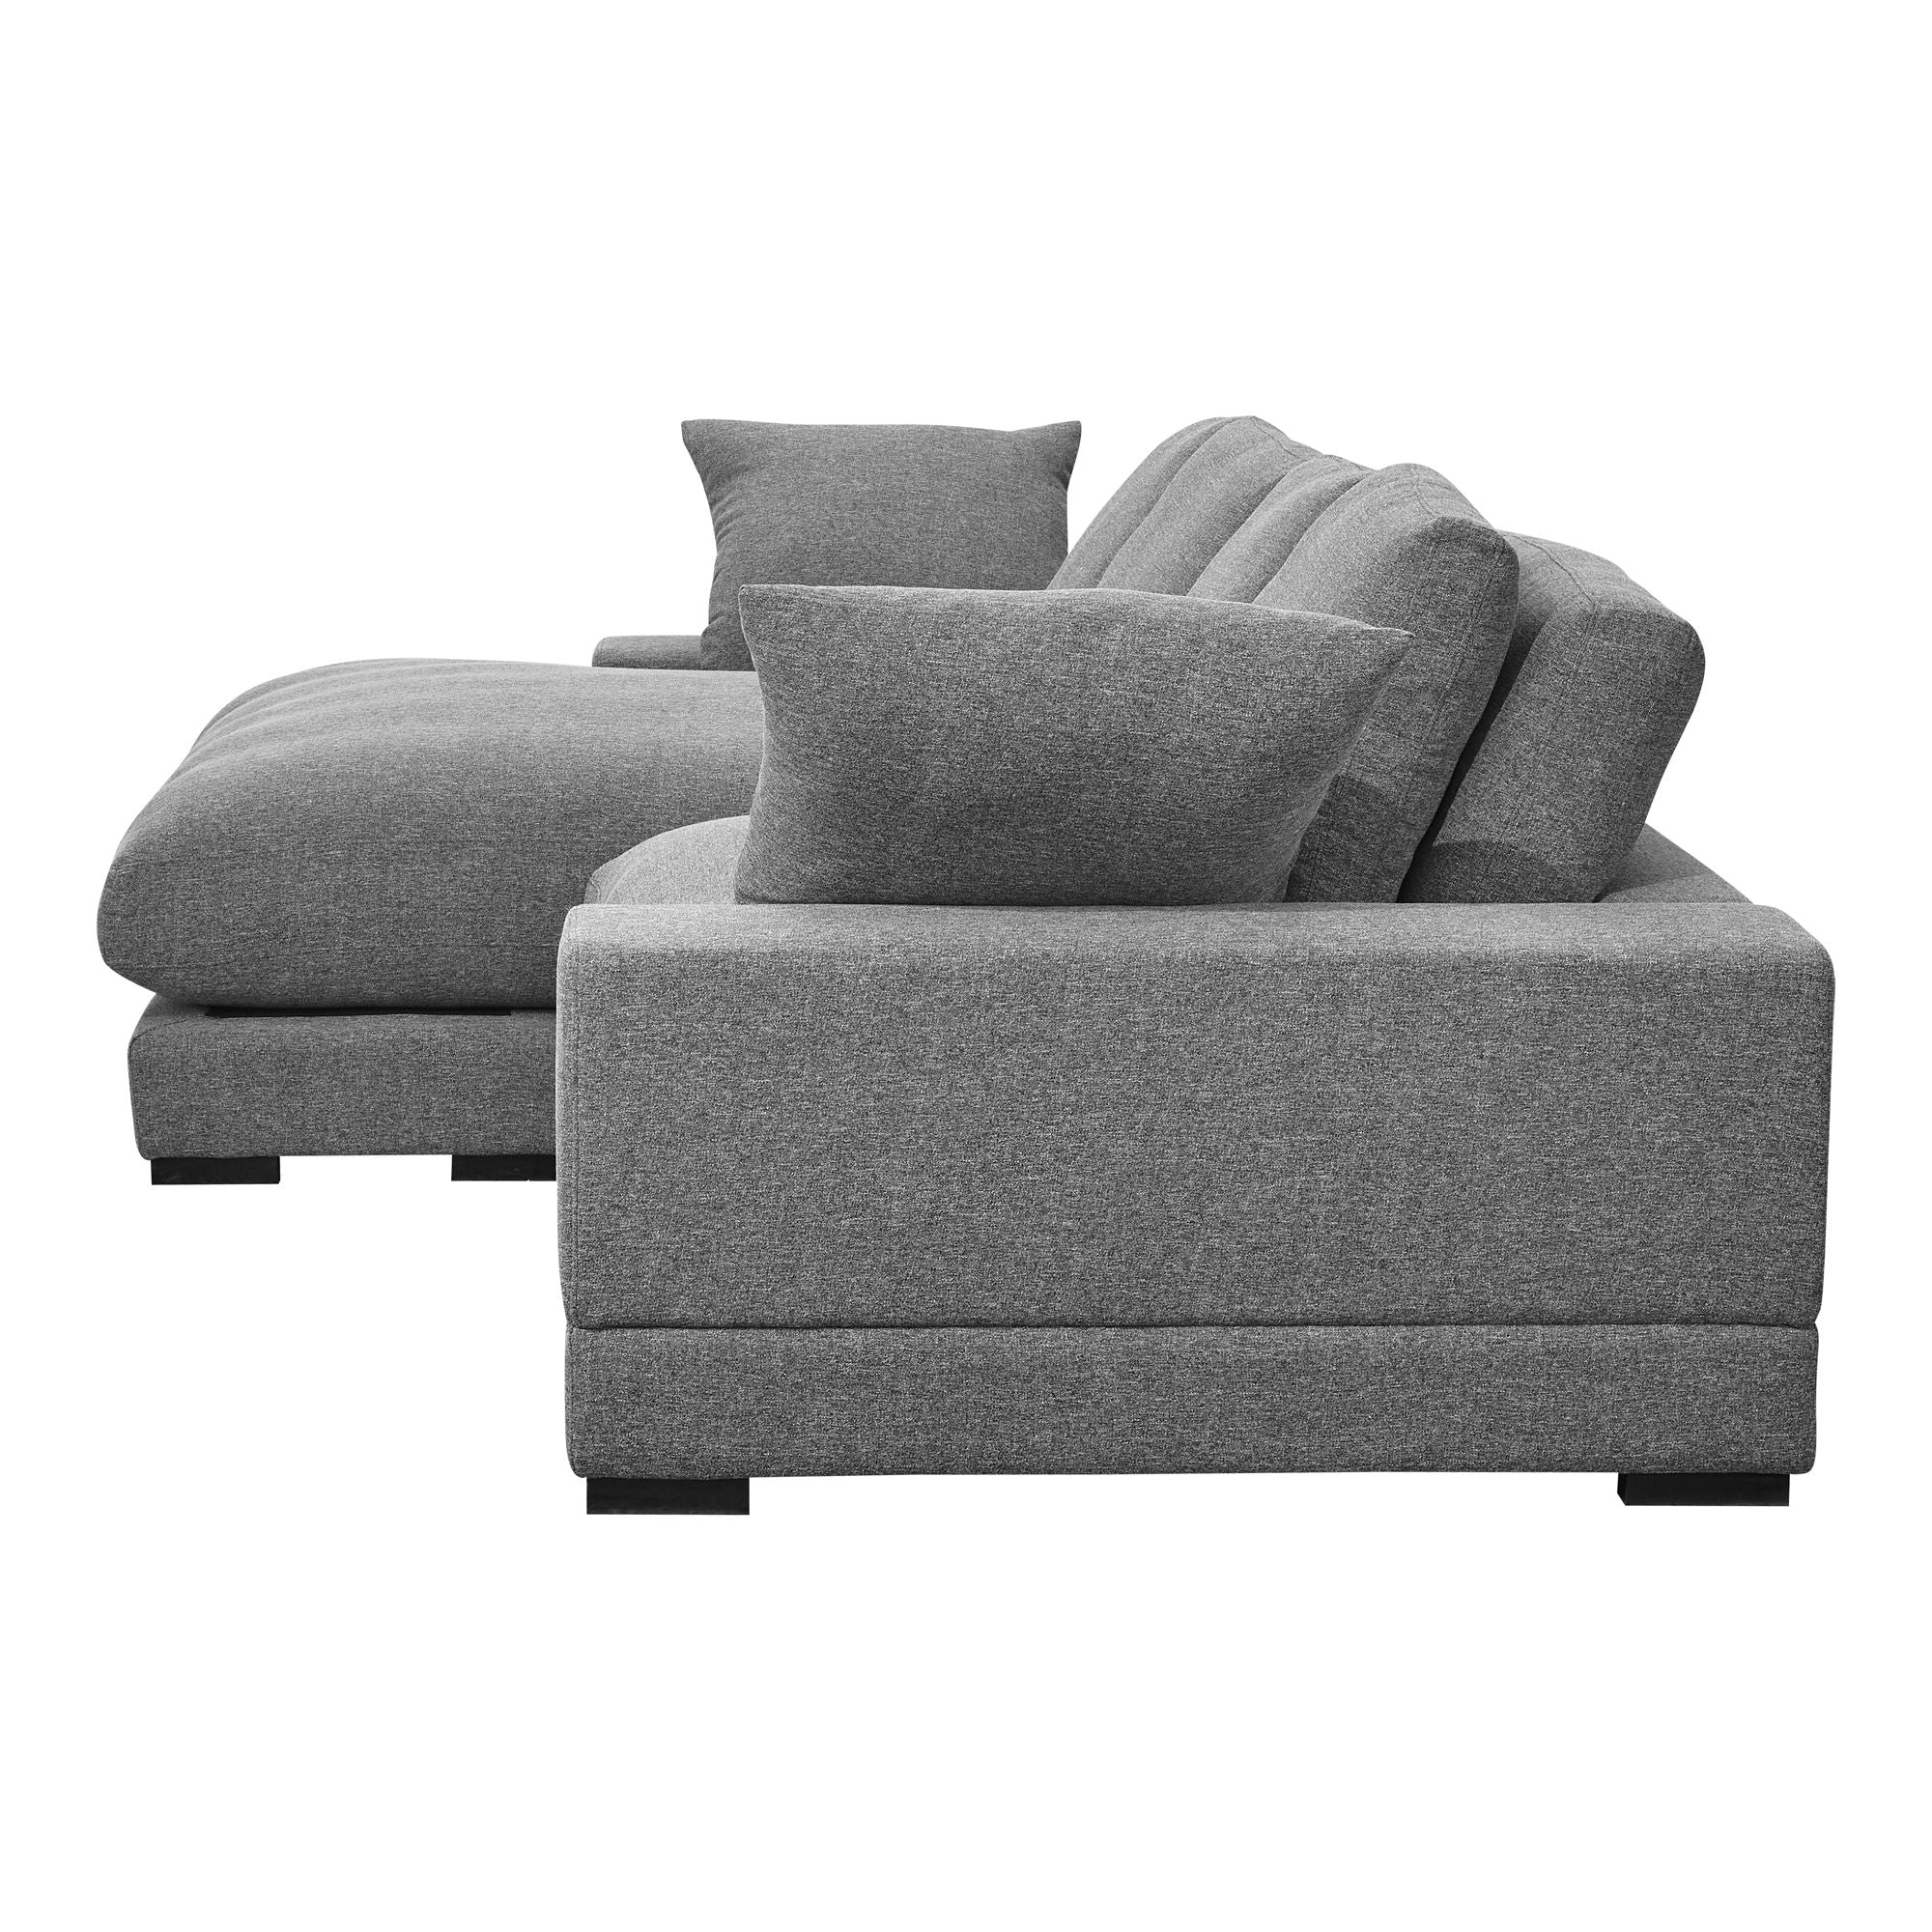 Plunge Grey Sectional - Plush Cushions-Stationary Sectionals-American Furniture Outlet